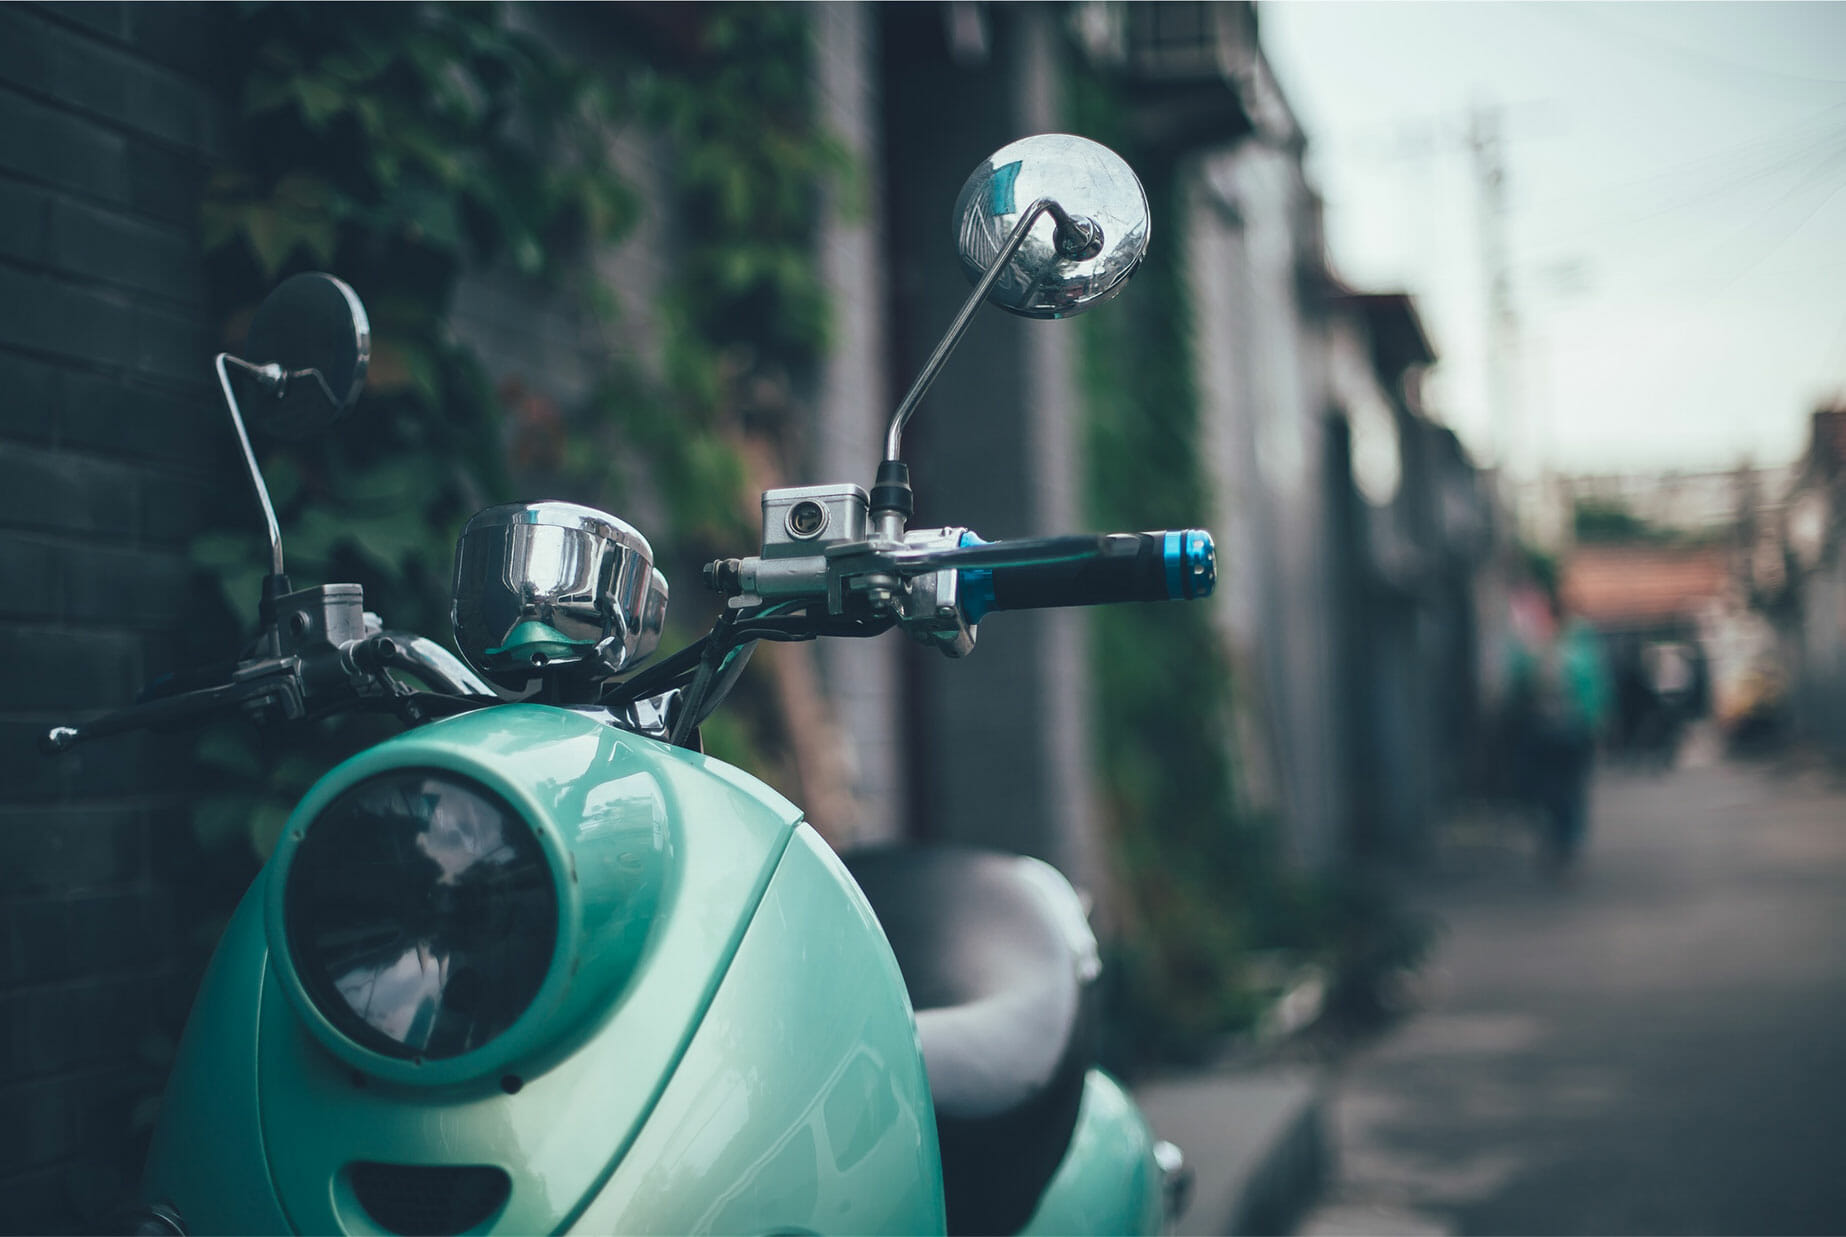 Does California Lemon Law Apply to Motorcycles?